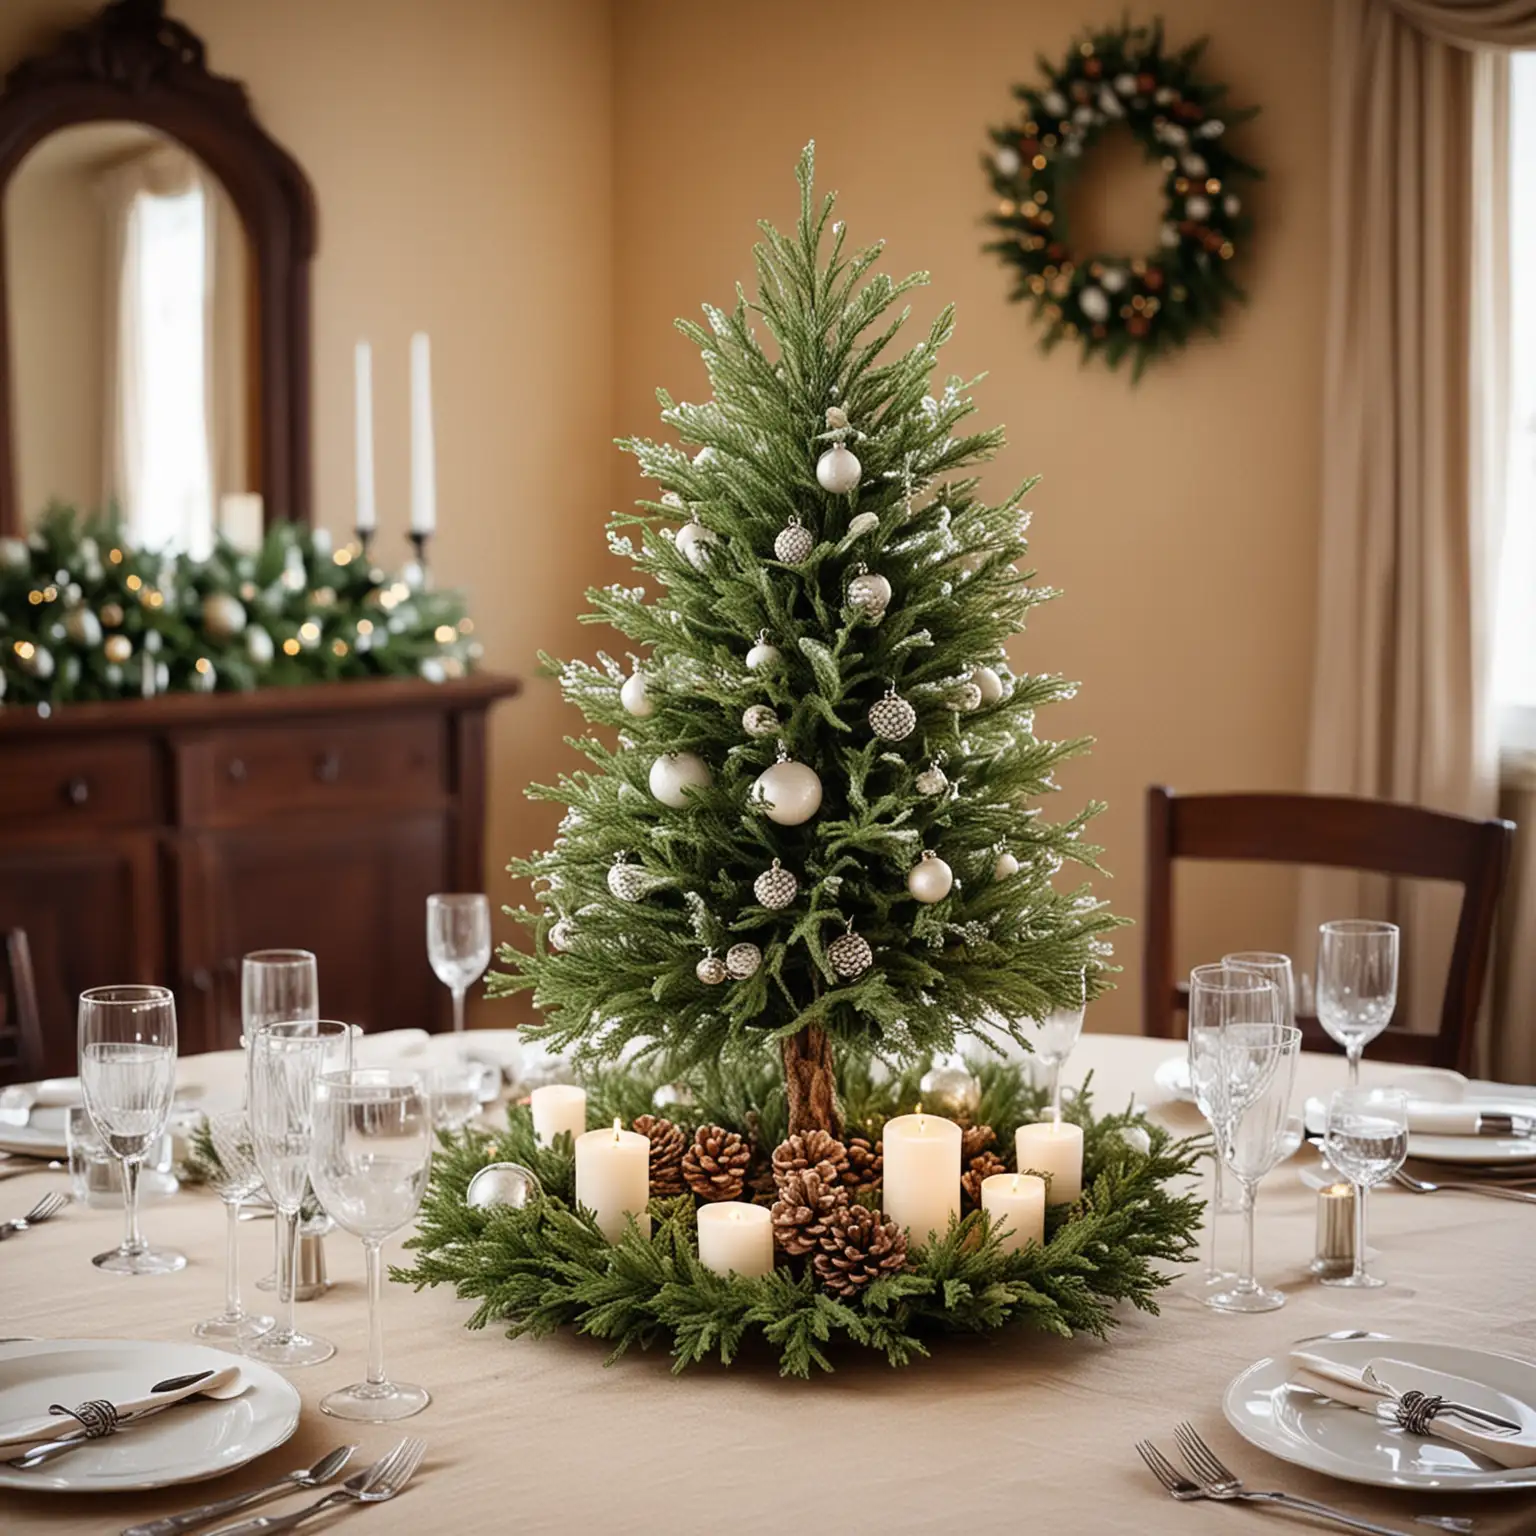 winter wedding centerpiece with tabletop christmas tree; nothing else in photo; keep background neutral